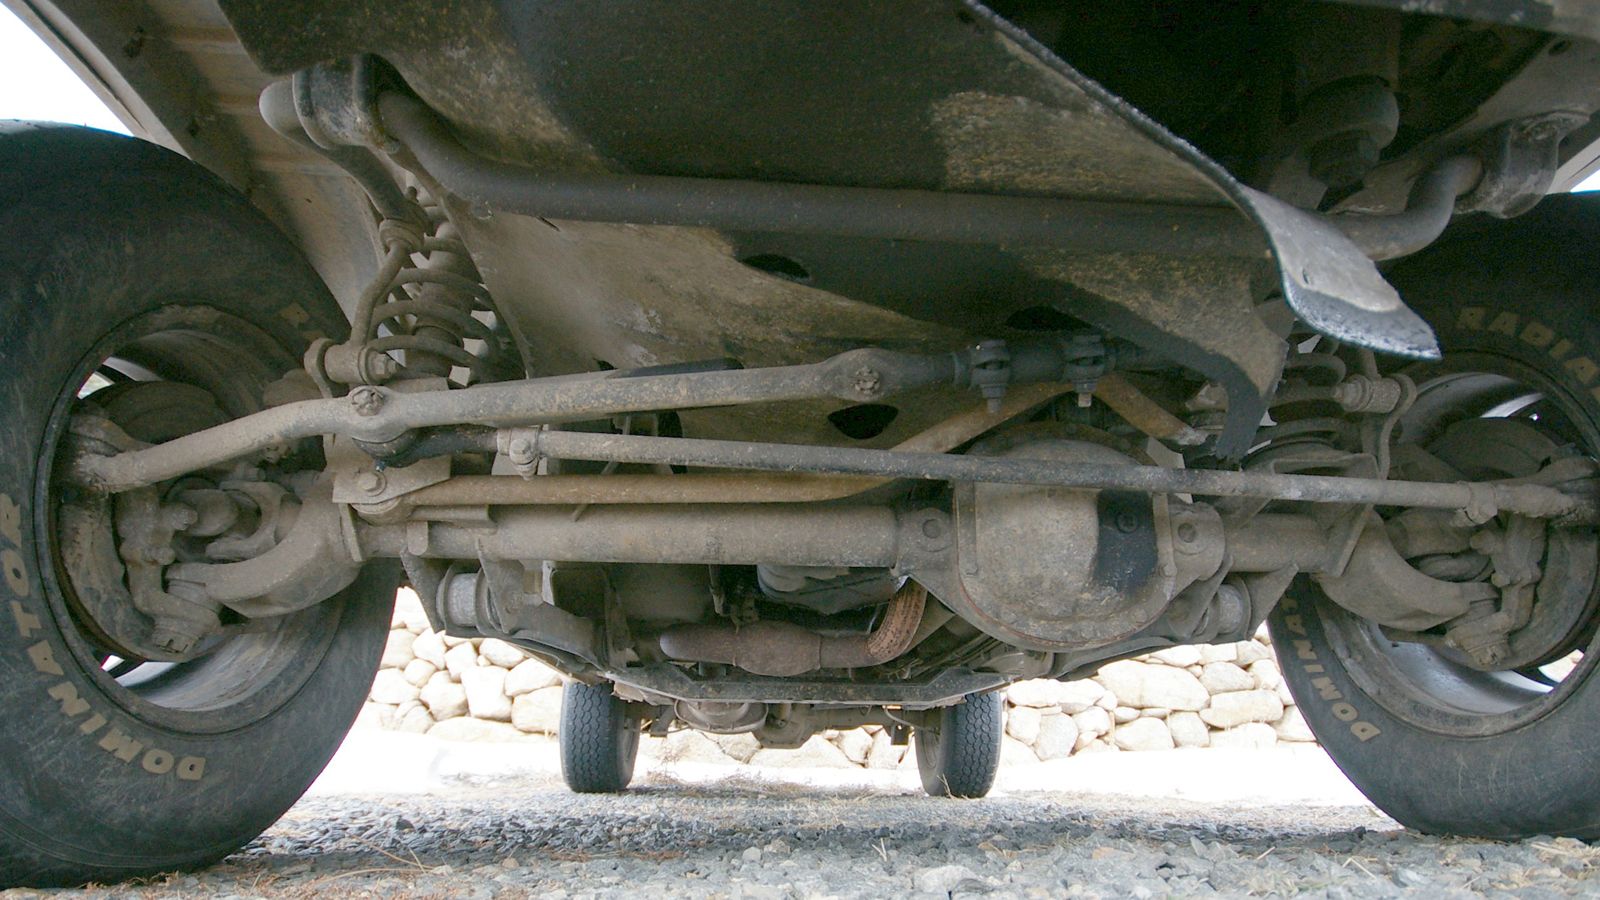 The death wobble is a problem that happens to some solid-axle vehicles,  usually when a suspension part is worn out